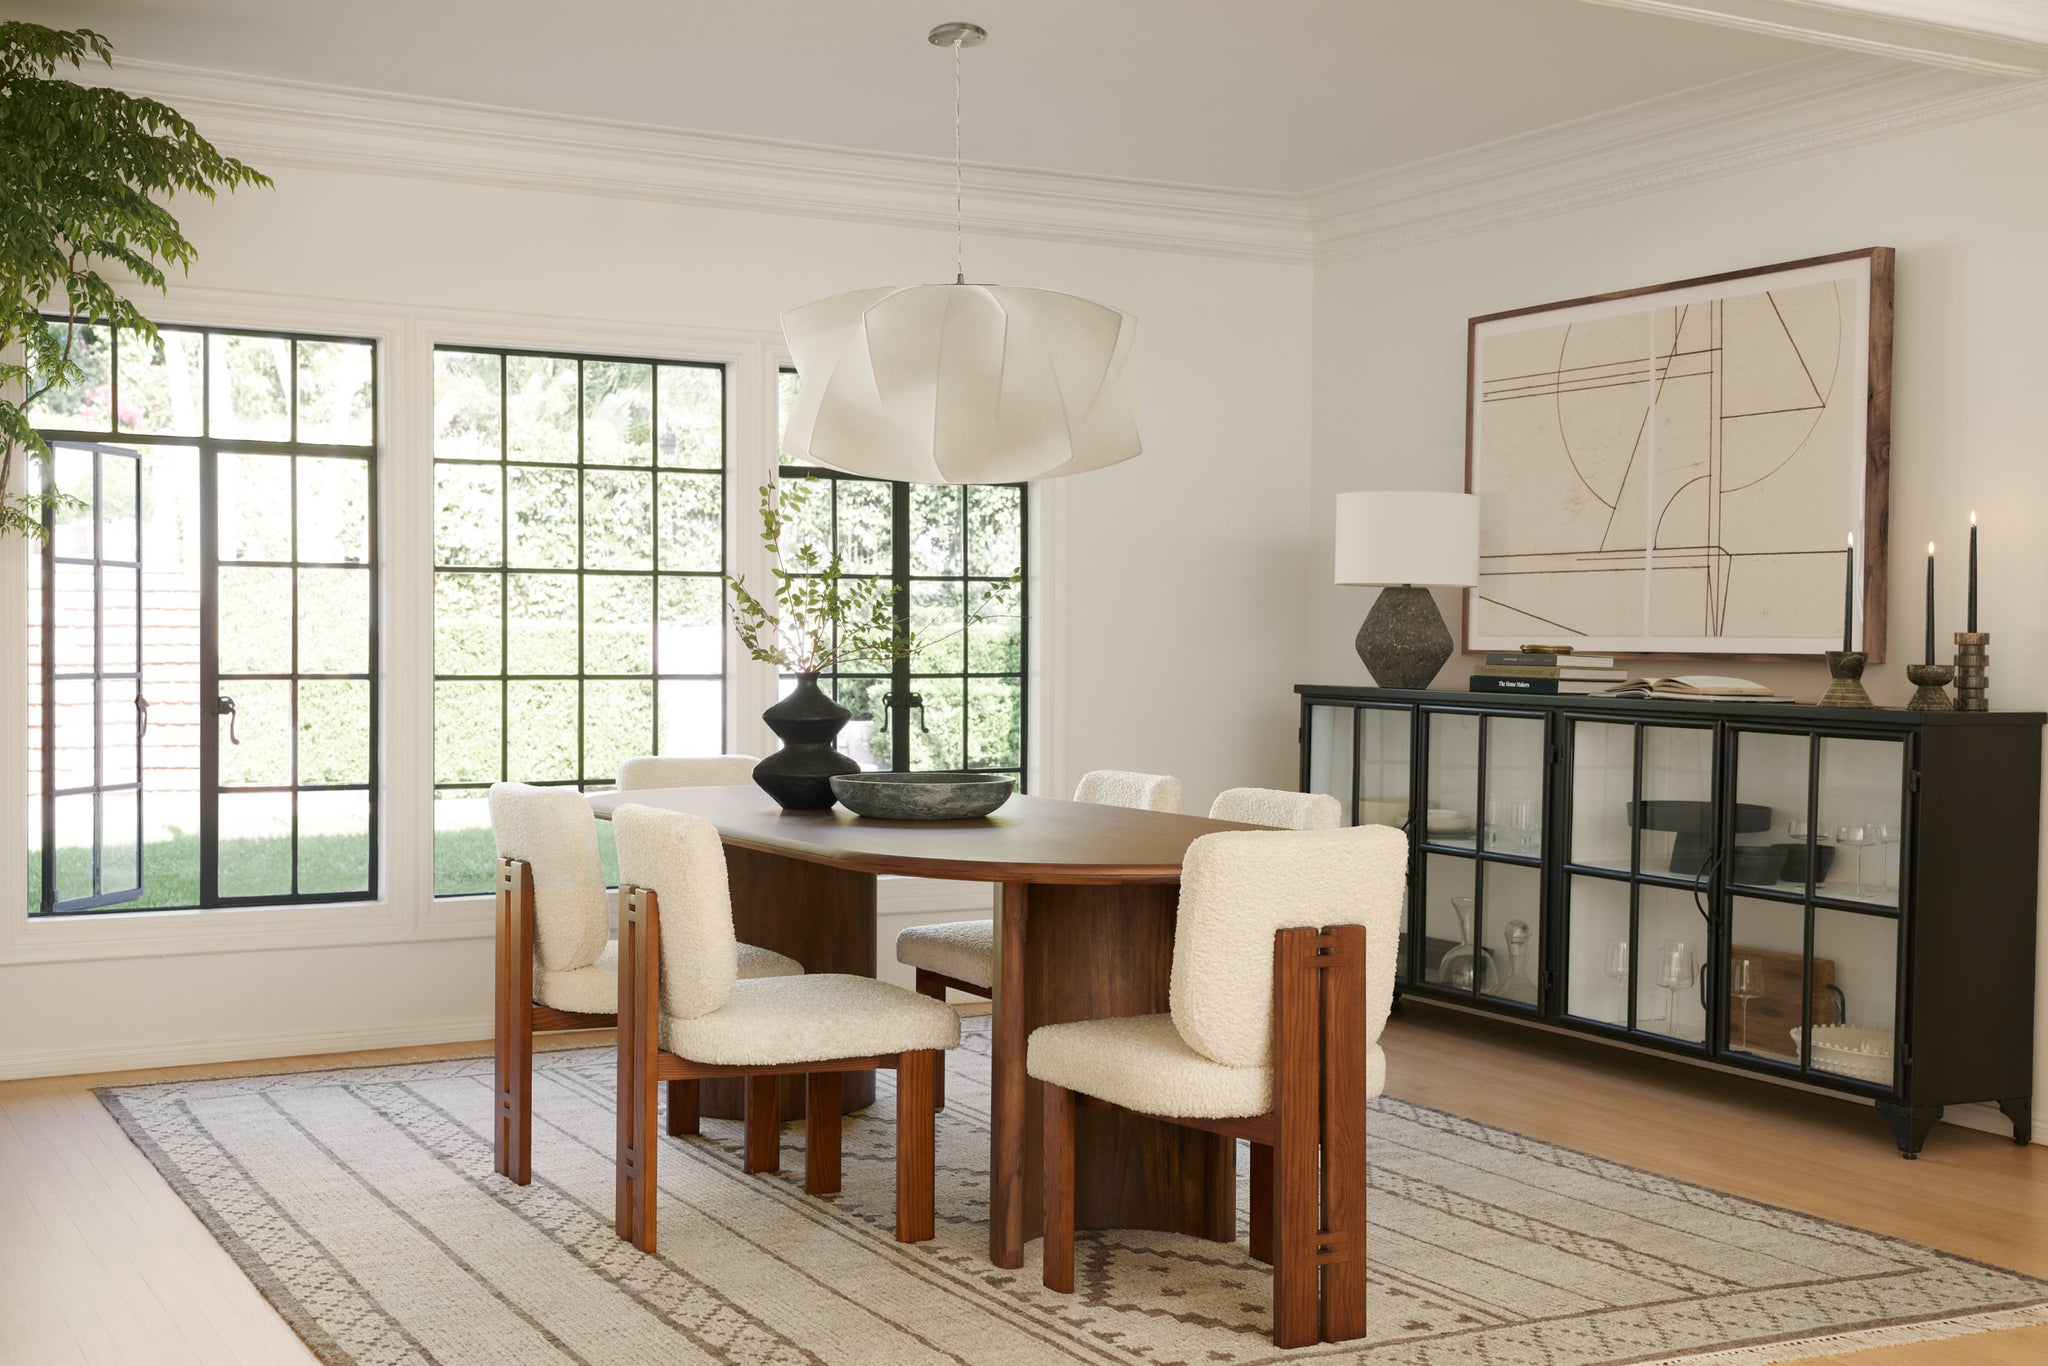 Six white boucle dining chairs with wooden backs and legs sit at an oval medium brown wood dining table. The seating sits on a white and gray geometric area rug and a modern white sculptural chandelier hangs above. A black sideboard buffet is off to the side.